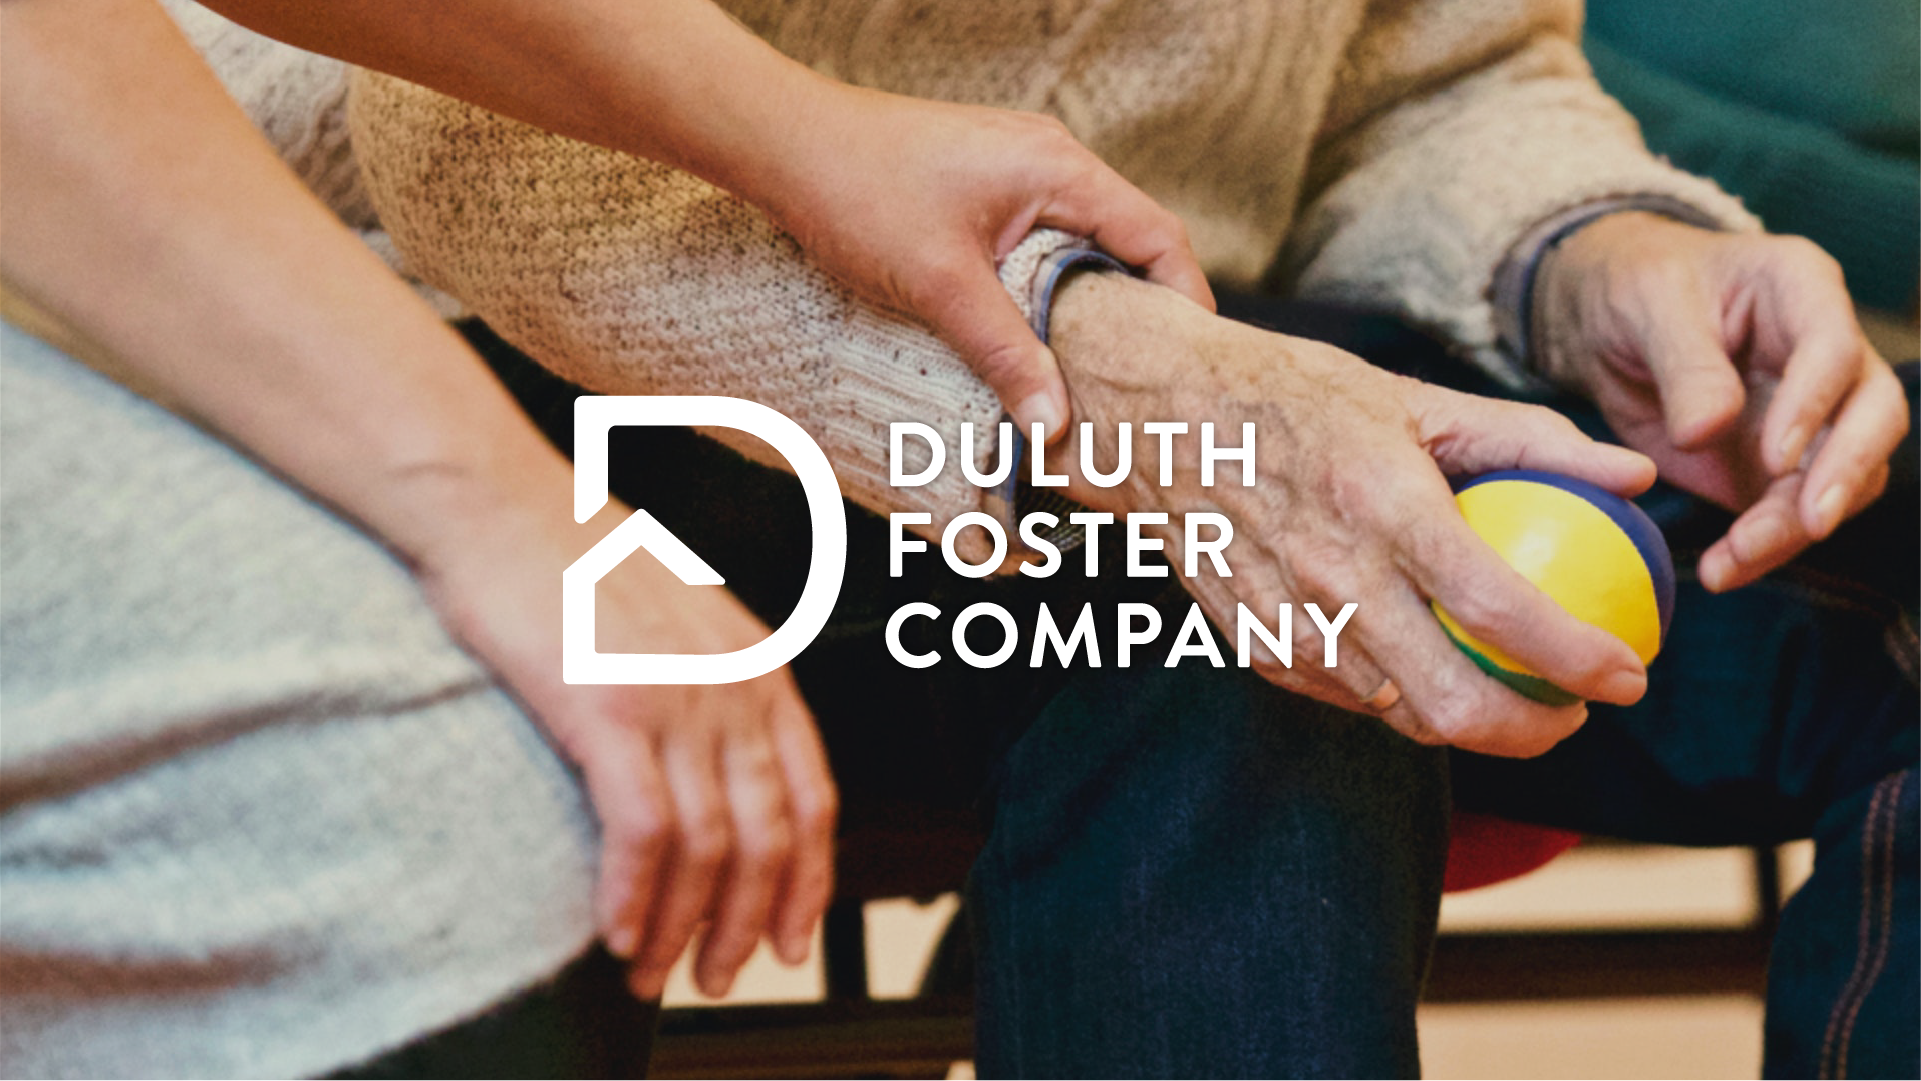 Duluth Foster Company logo on imagery, created by Šek Design Studio